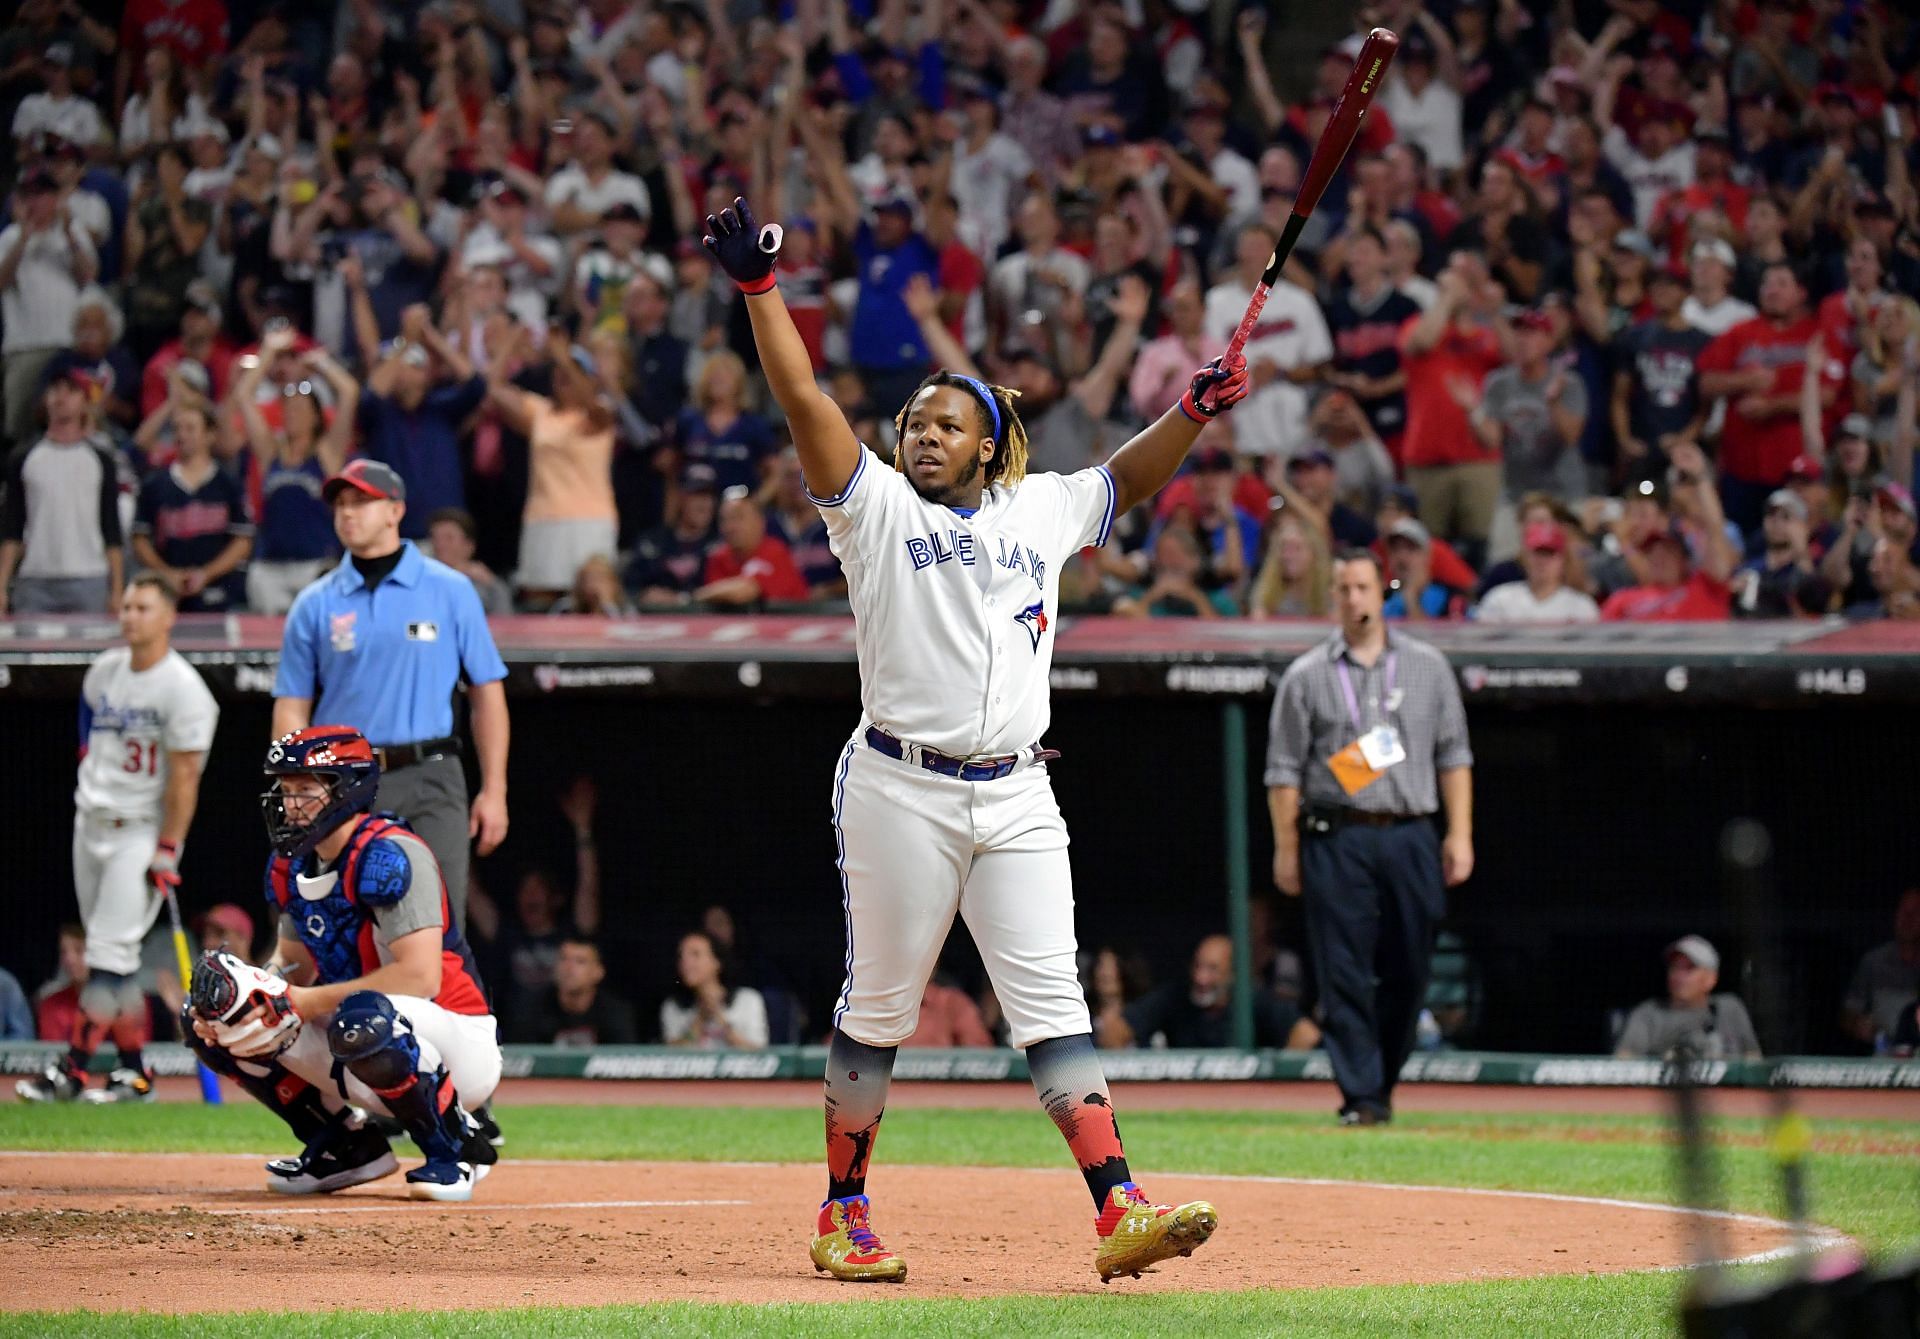 Modern All-Star games are mostly sustained by accompanying events, such as MLB&#039;s Home Run Derby, where Vladimir Guerrero Jr. was the runner-up in 2019 (Photo: Getty)